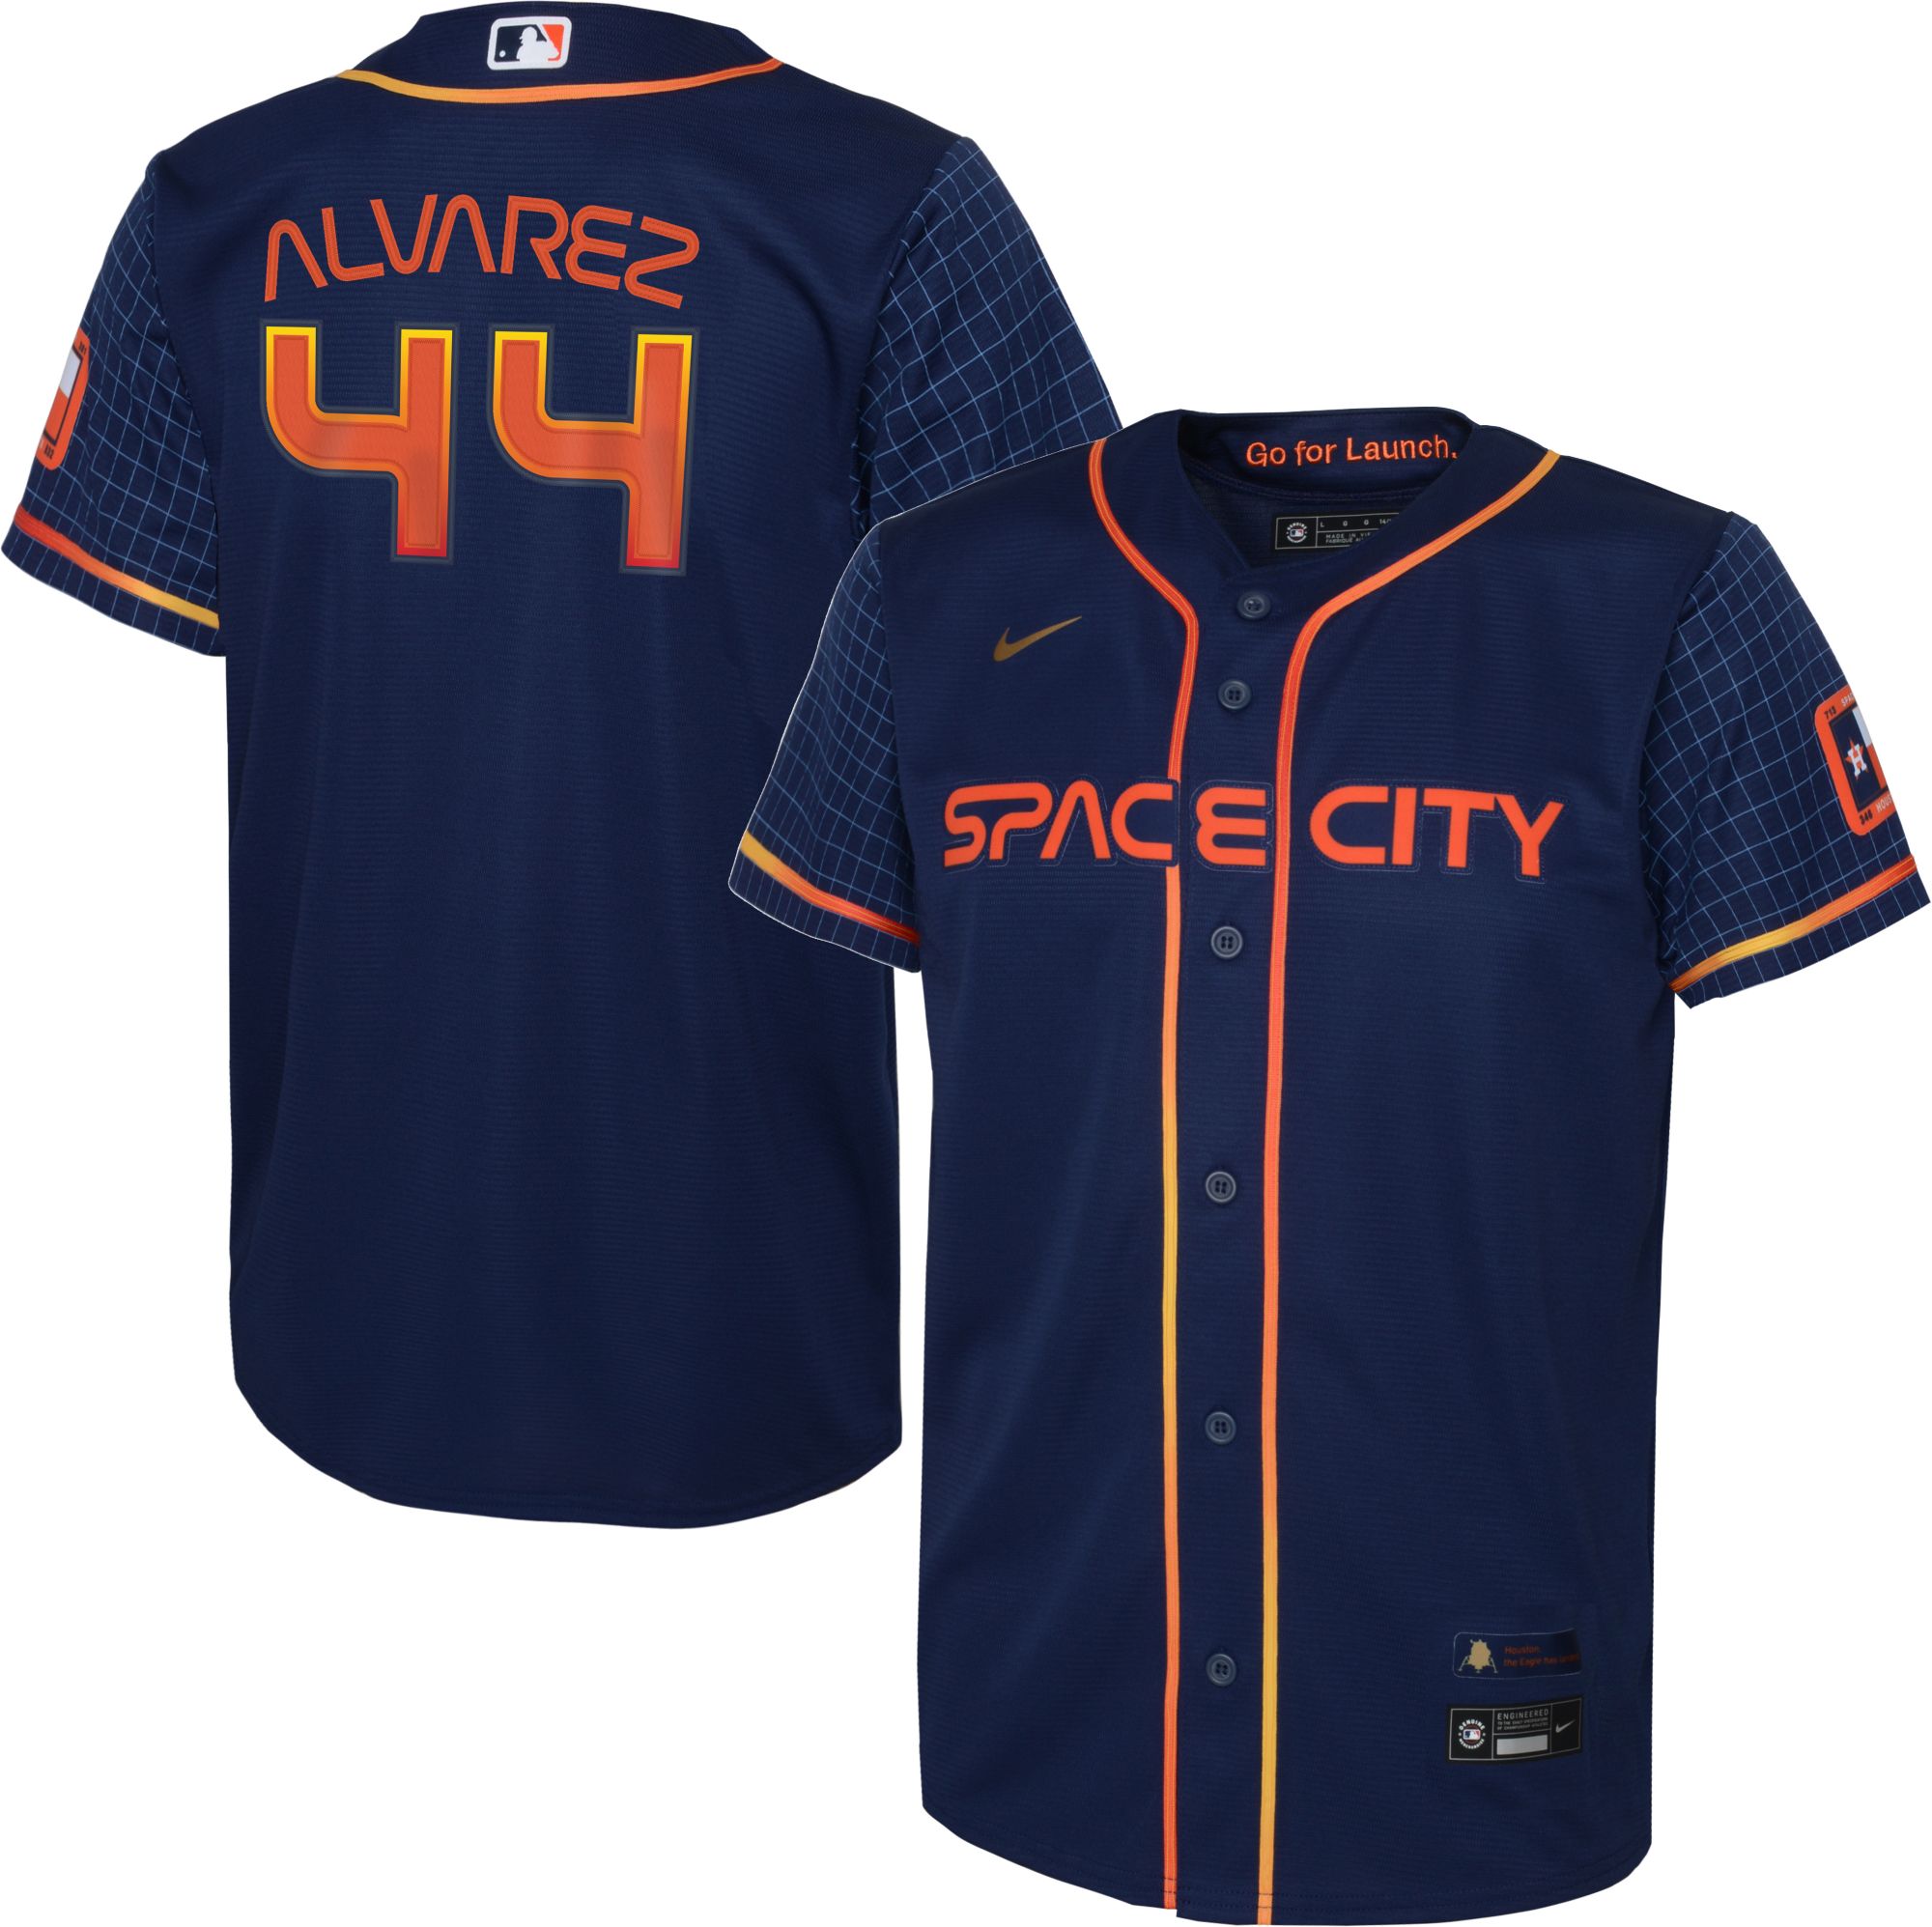 Nike Youth Houston Astros José Altuve #27 2022 City Connect Cool Base Jersey